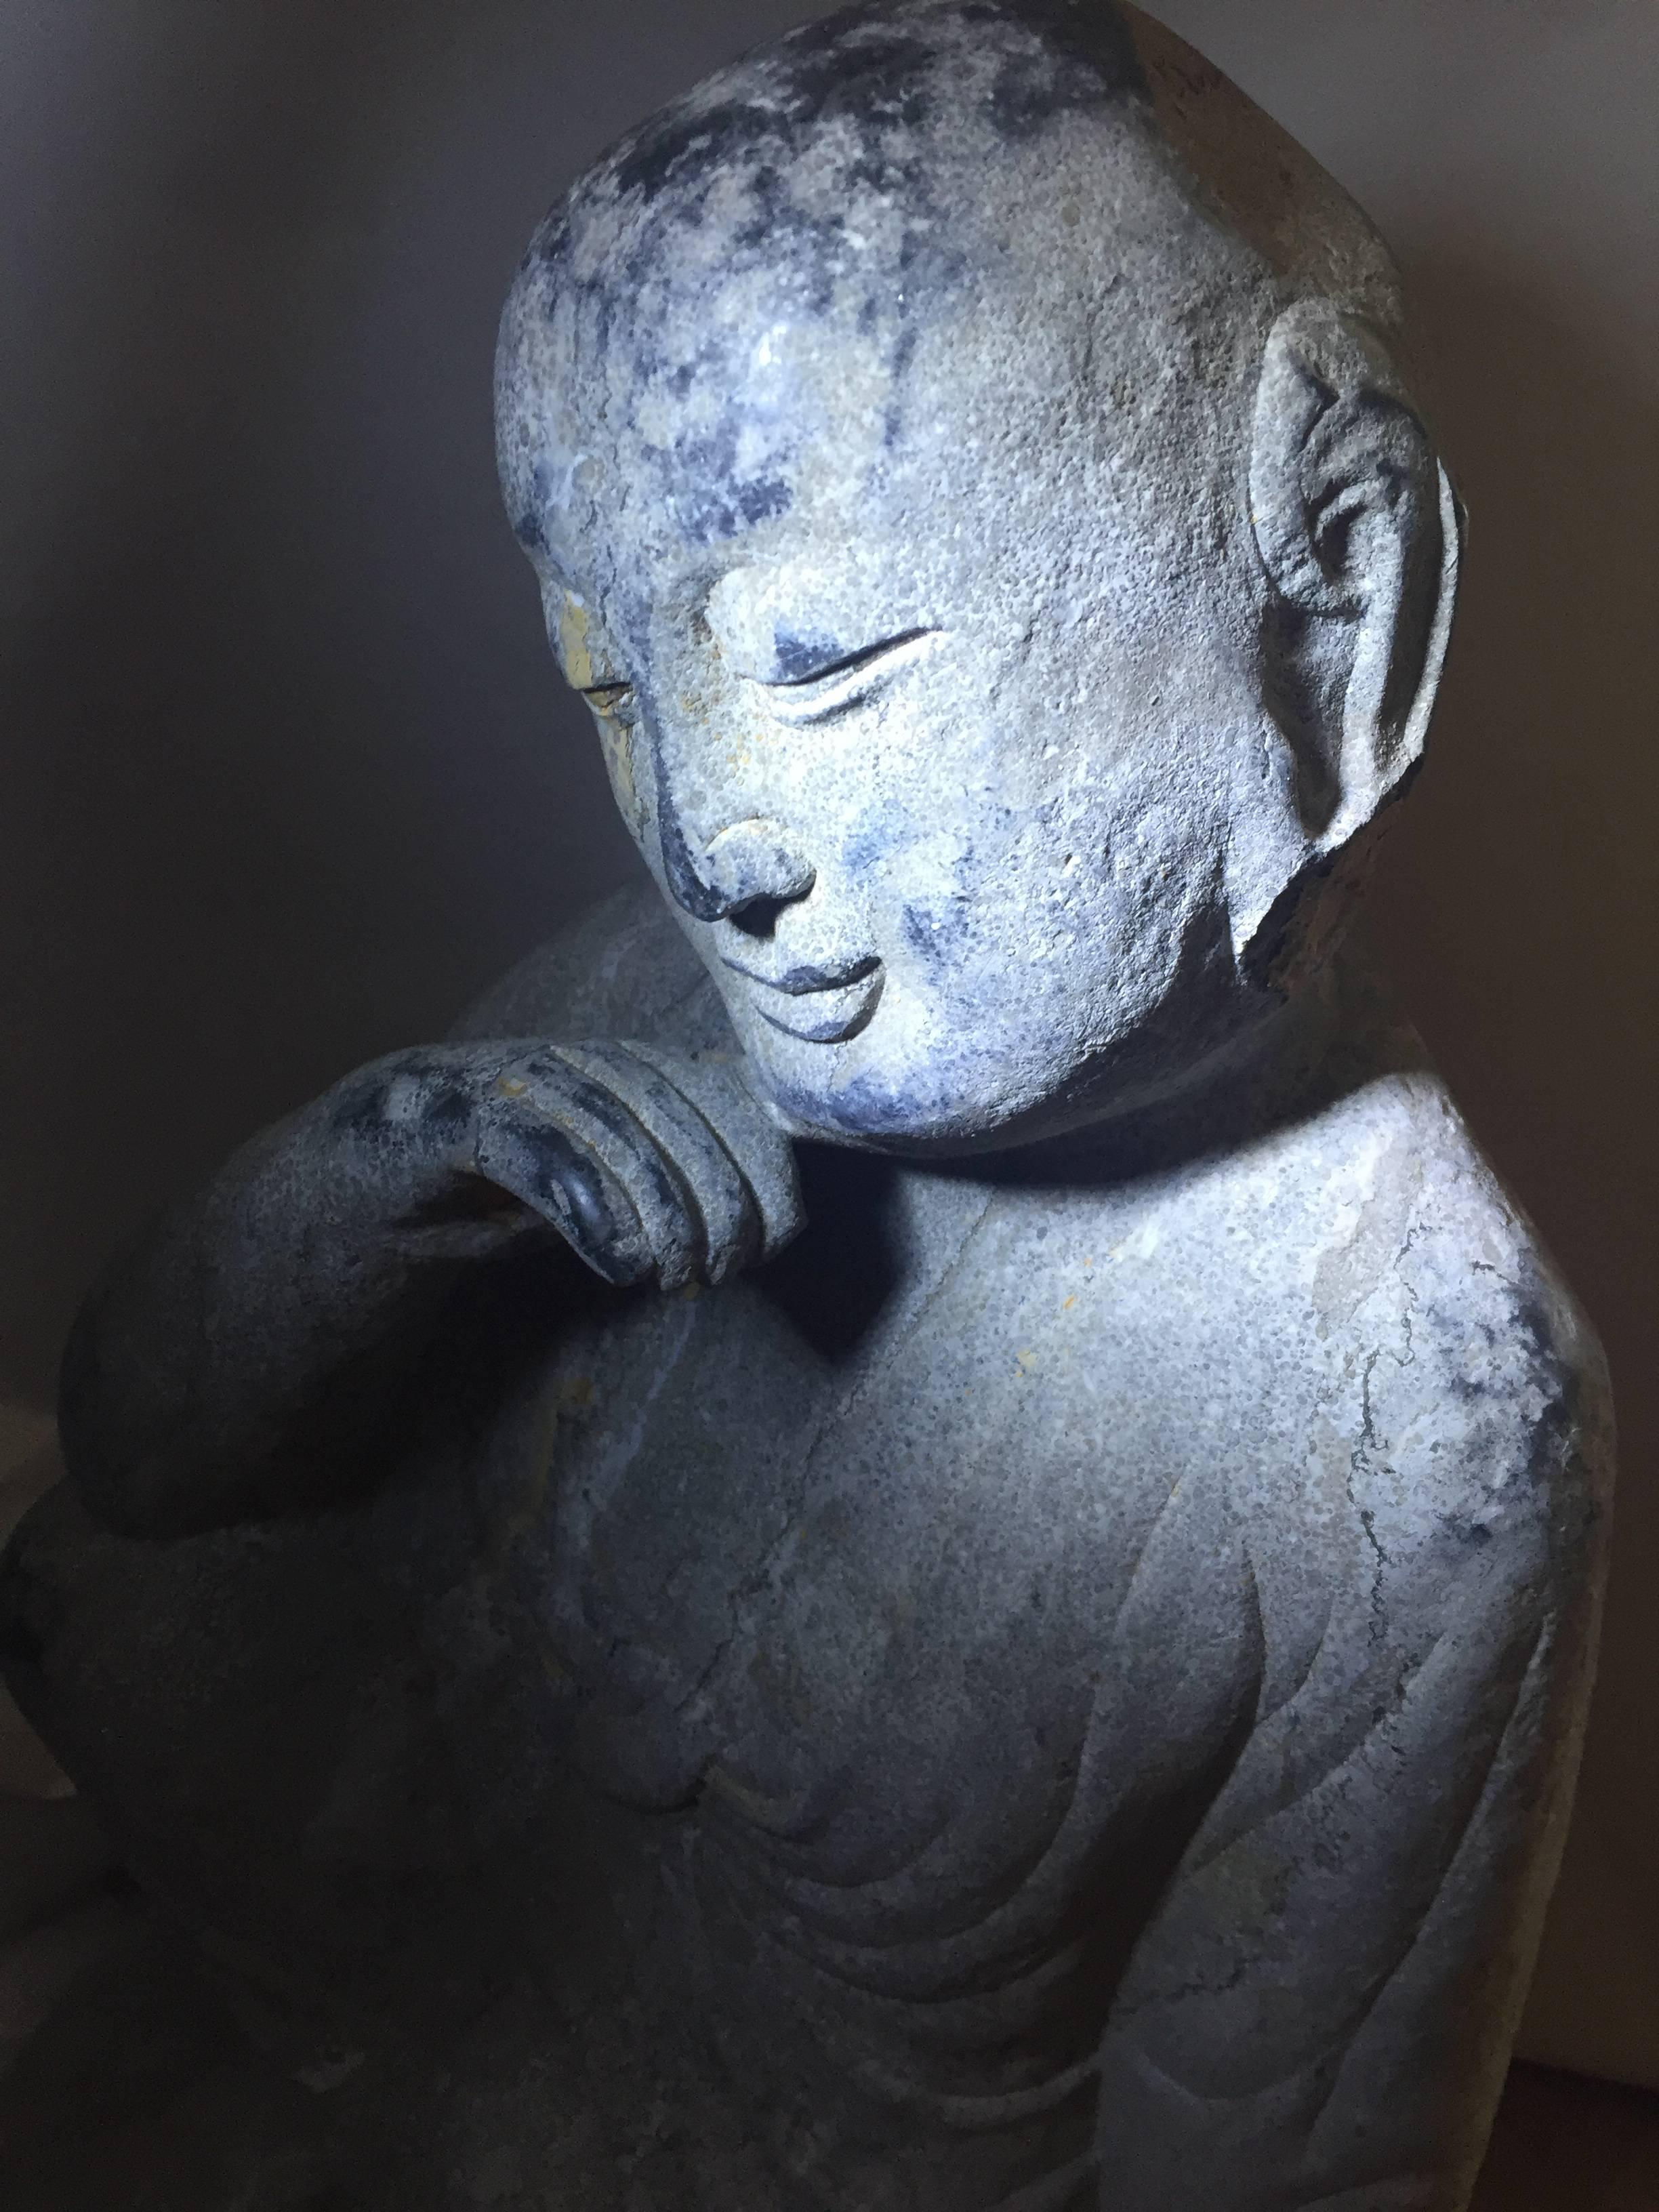 This rare 19th century piece depicts Buddha in contemplation. Carved out of solid stone, the sculpture demonstrates wonderful artistry at the same time extrudes a sense of therapeutic calmness.